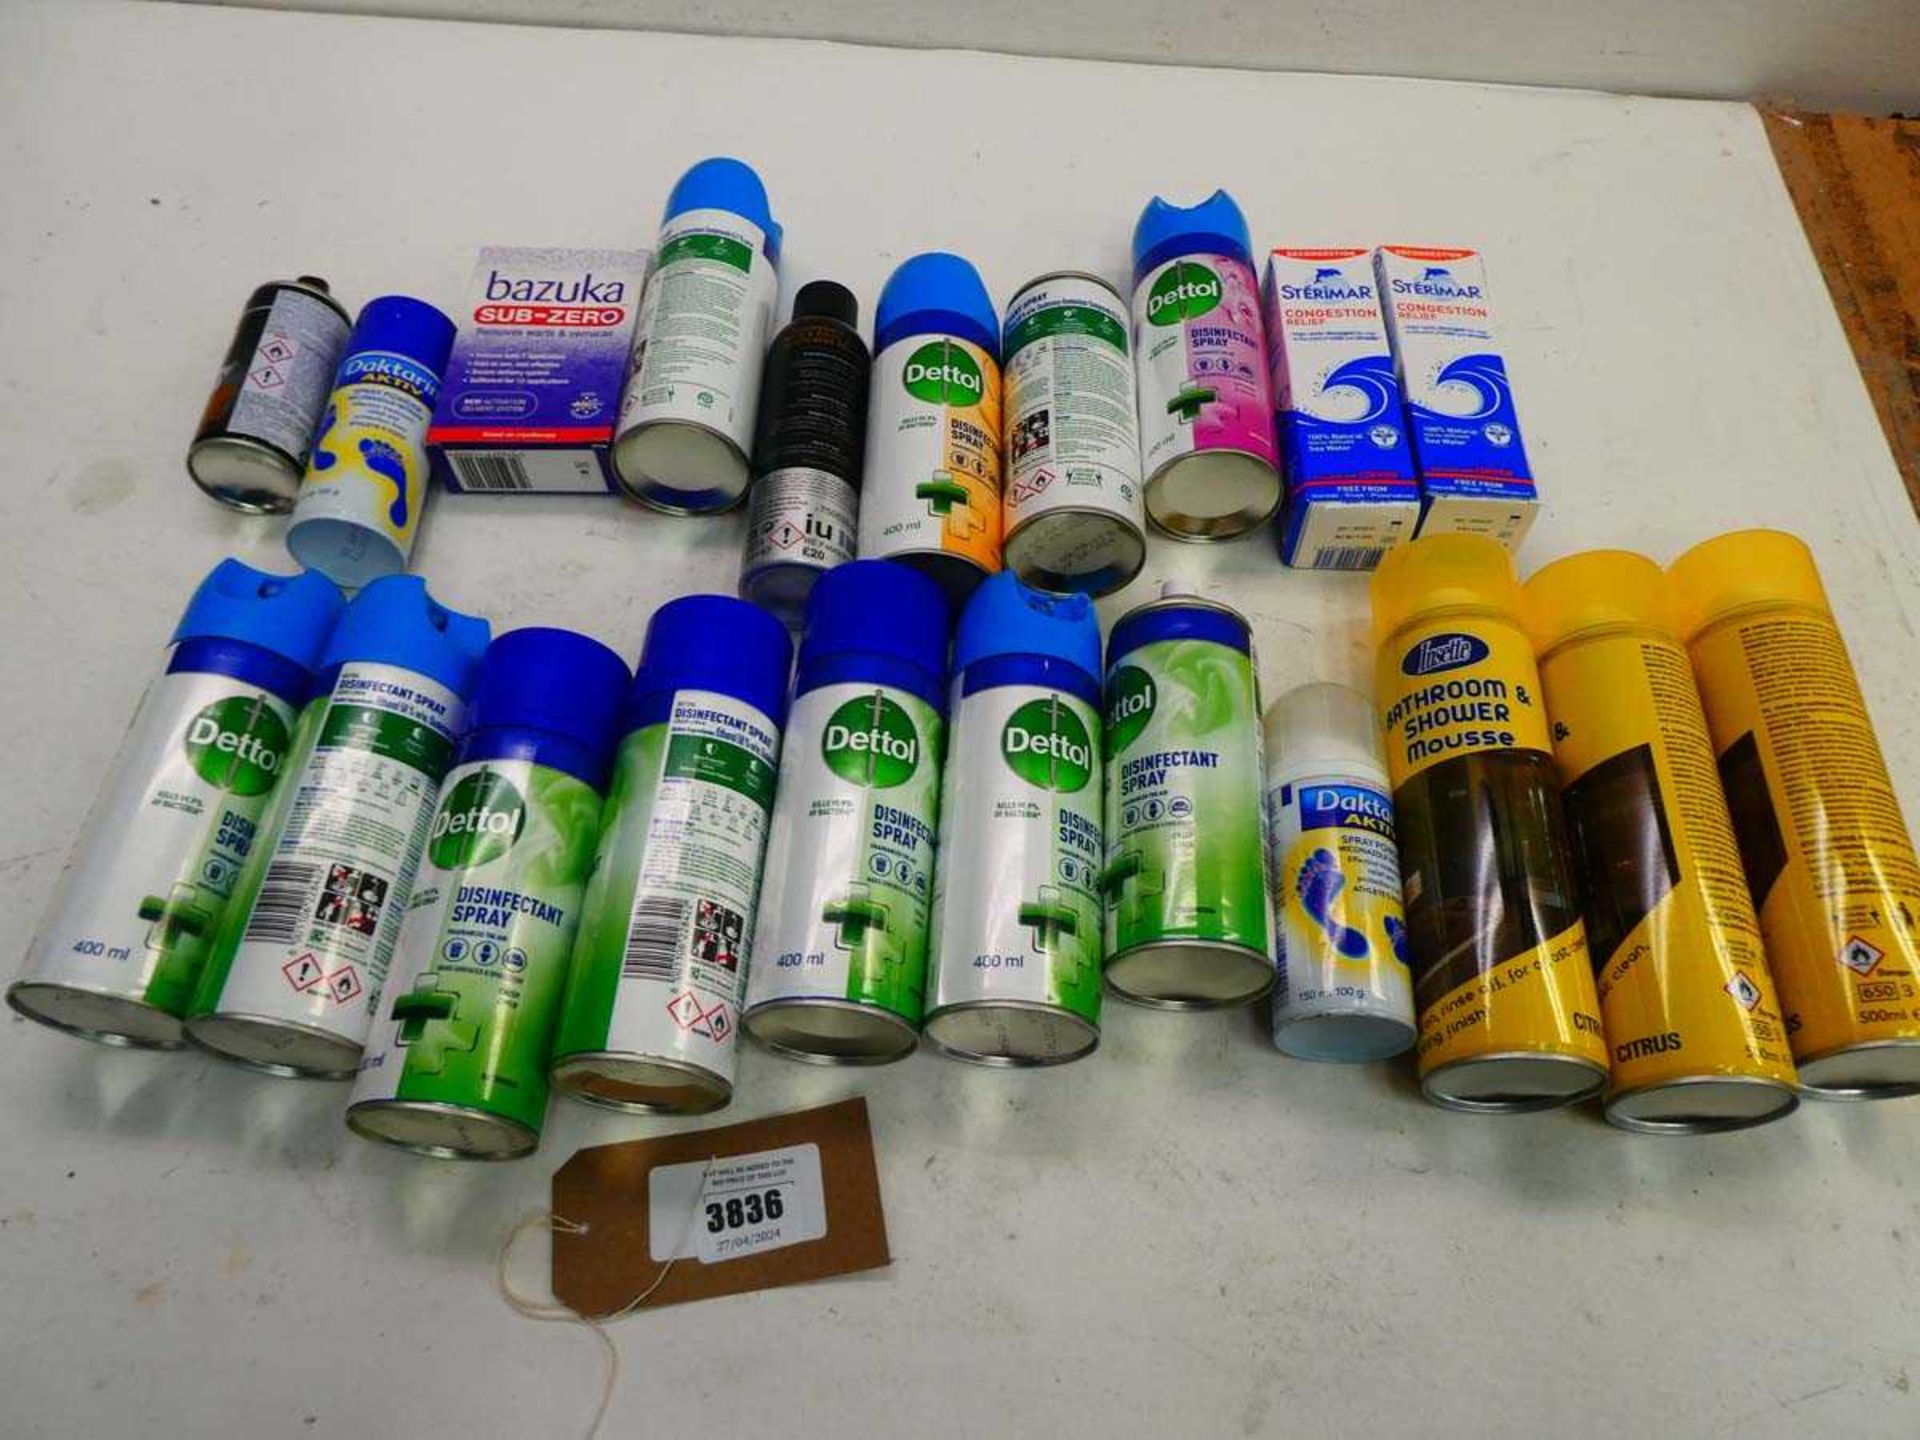 +VAT Selection of disinfectants, Congestion relief, bathroom shower mouse cleaner, etc